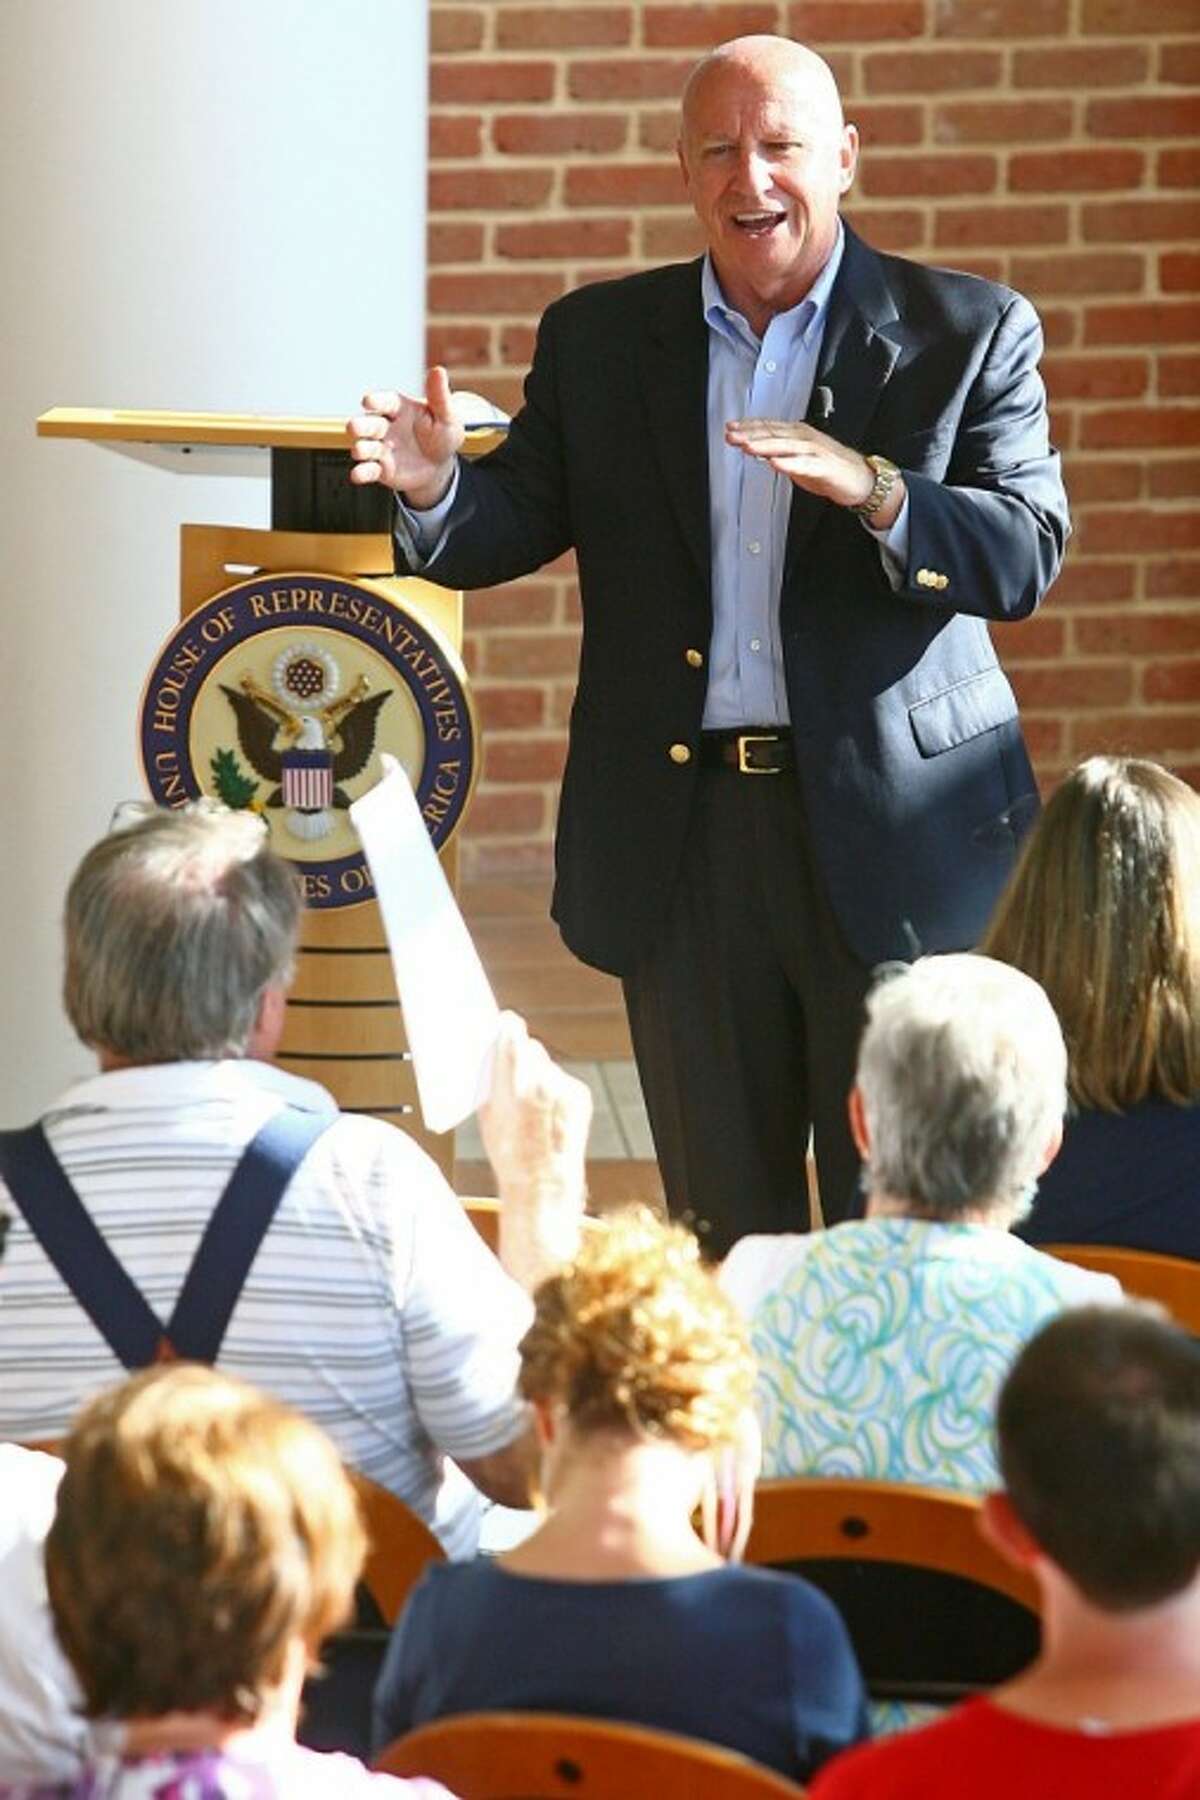 U.S. Rep. Kevin Brady, R-The Woodlands, hosted a town-hall meeting at the EMCID Building Monday in New Caney.